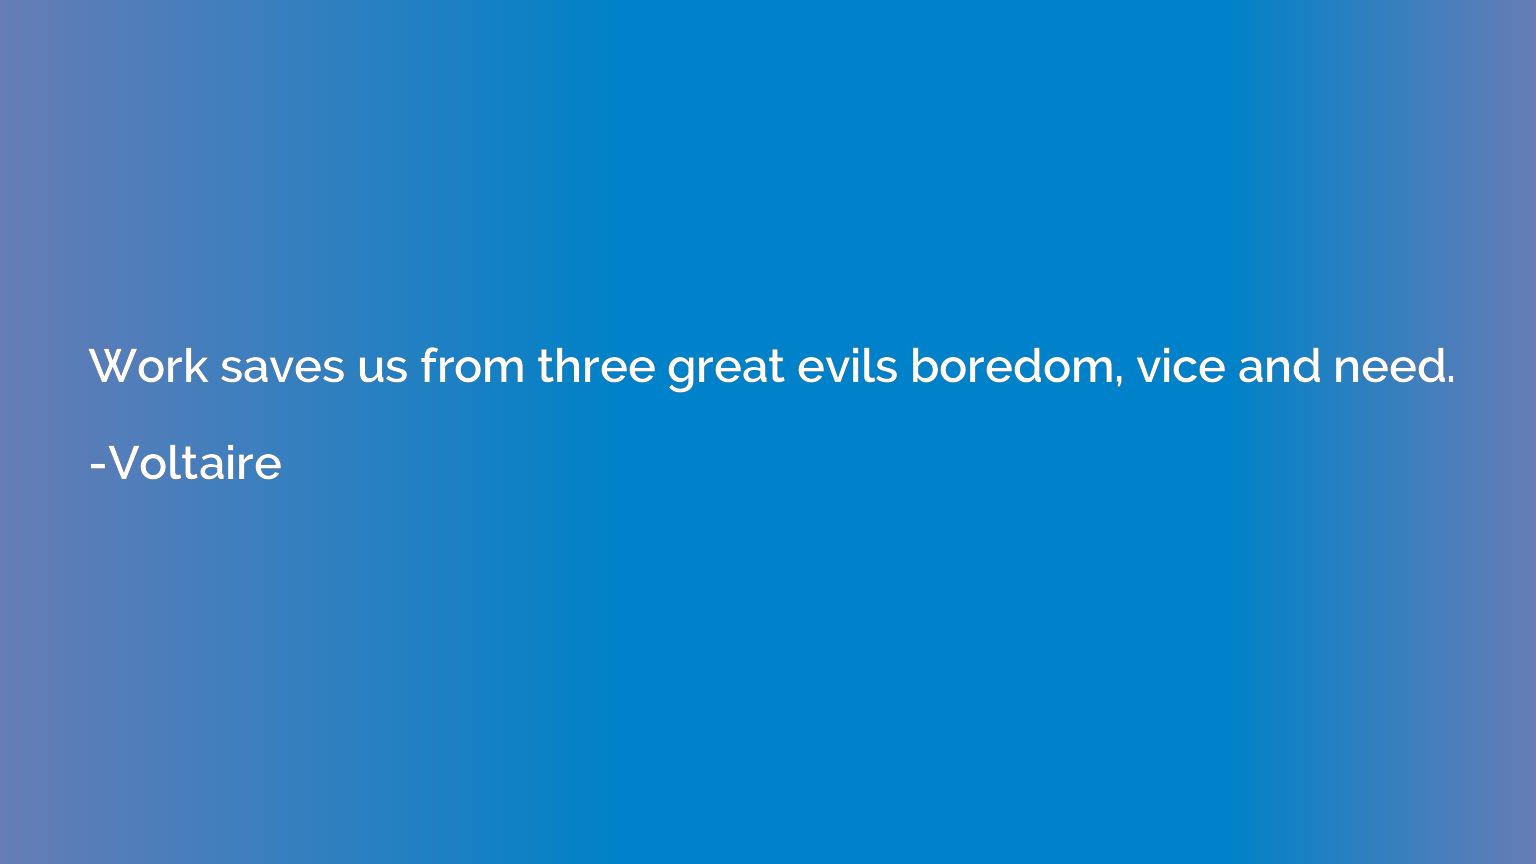 Work saves us from three great evils boredom, vice and need.